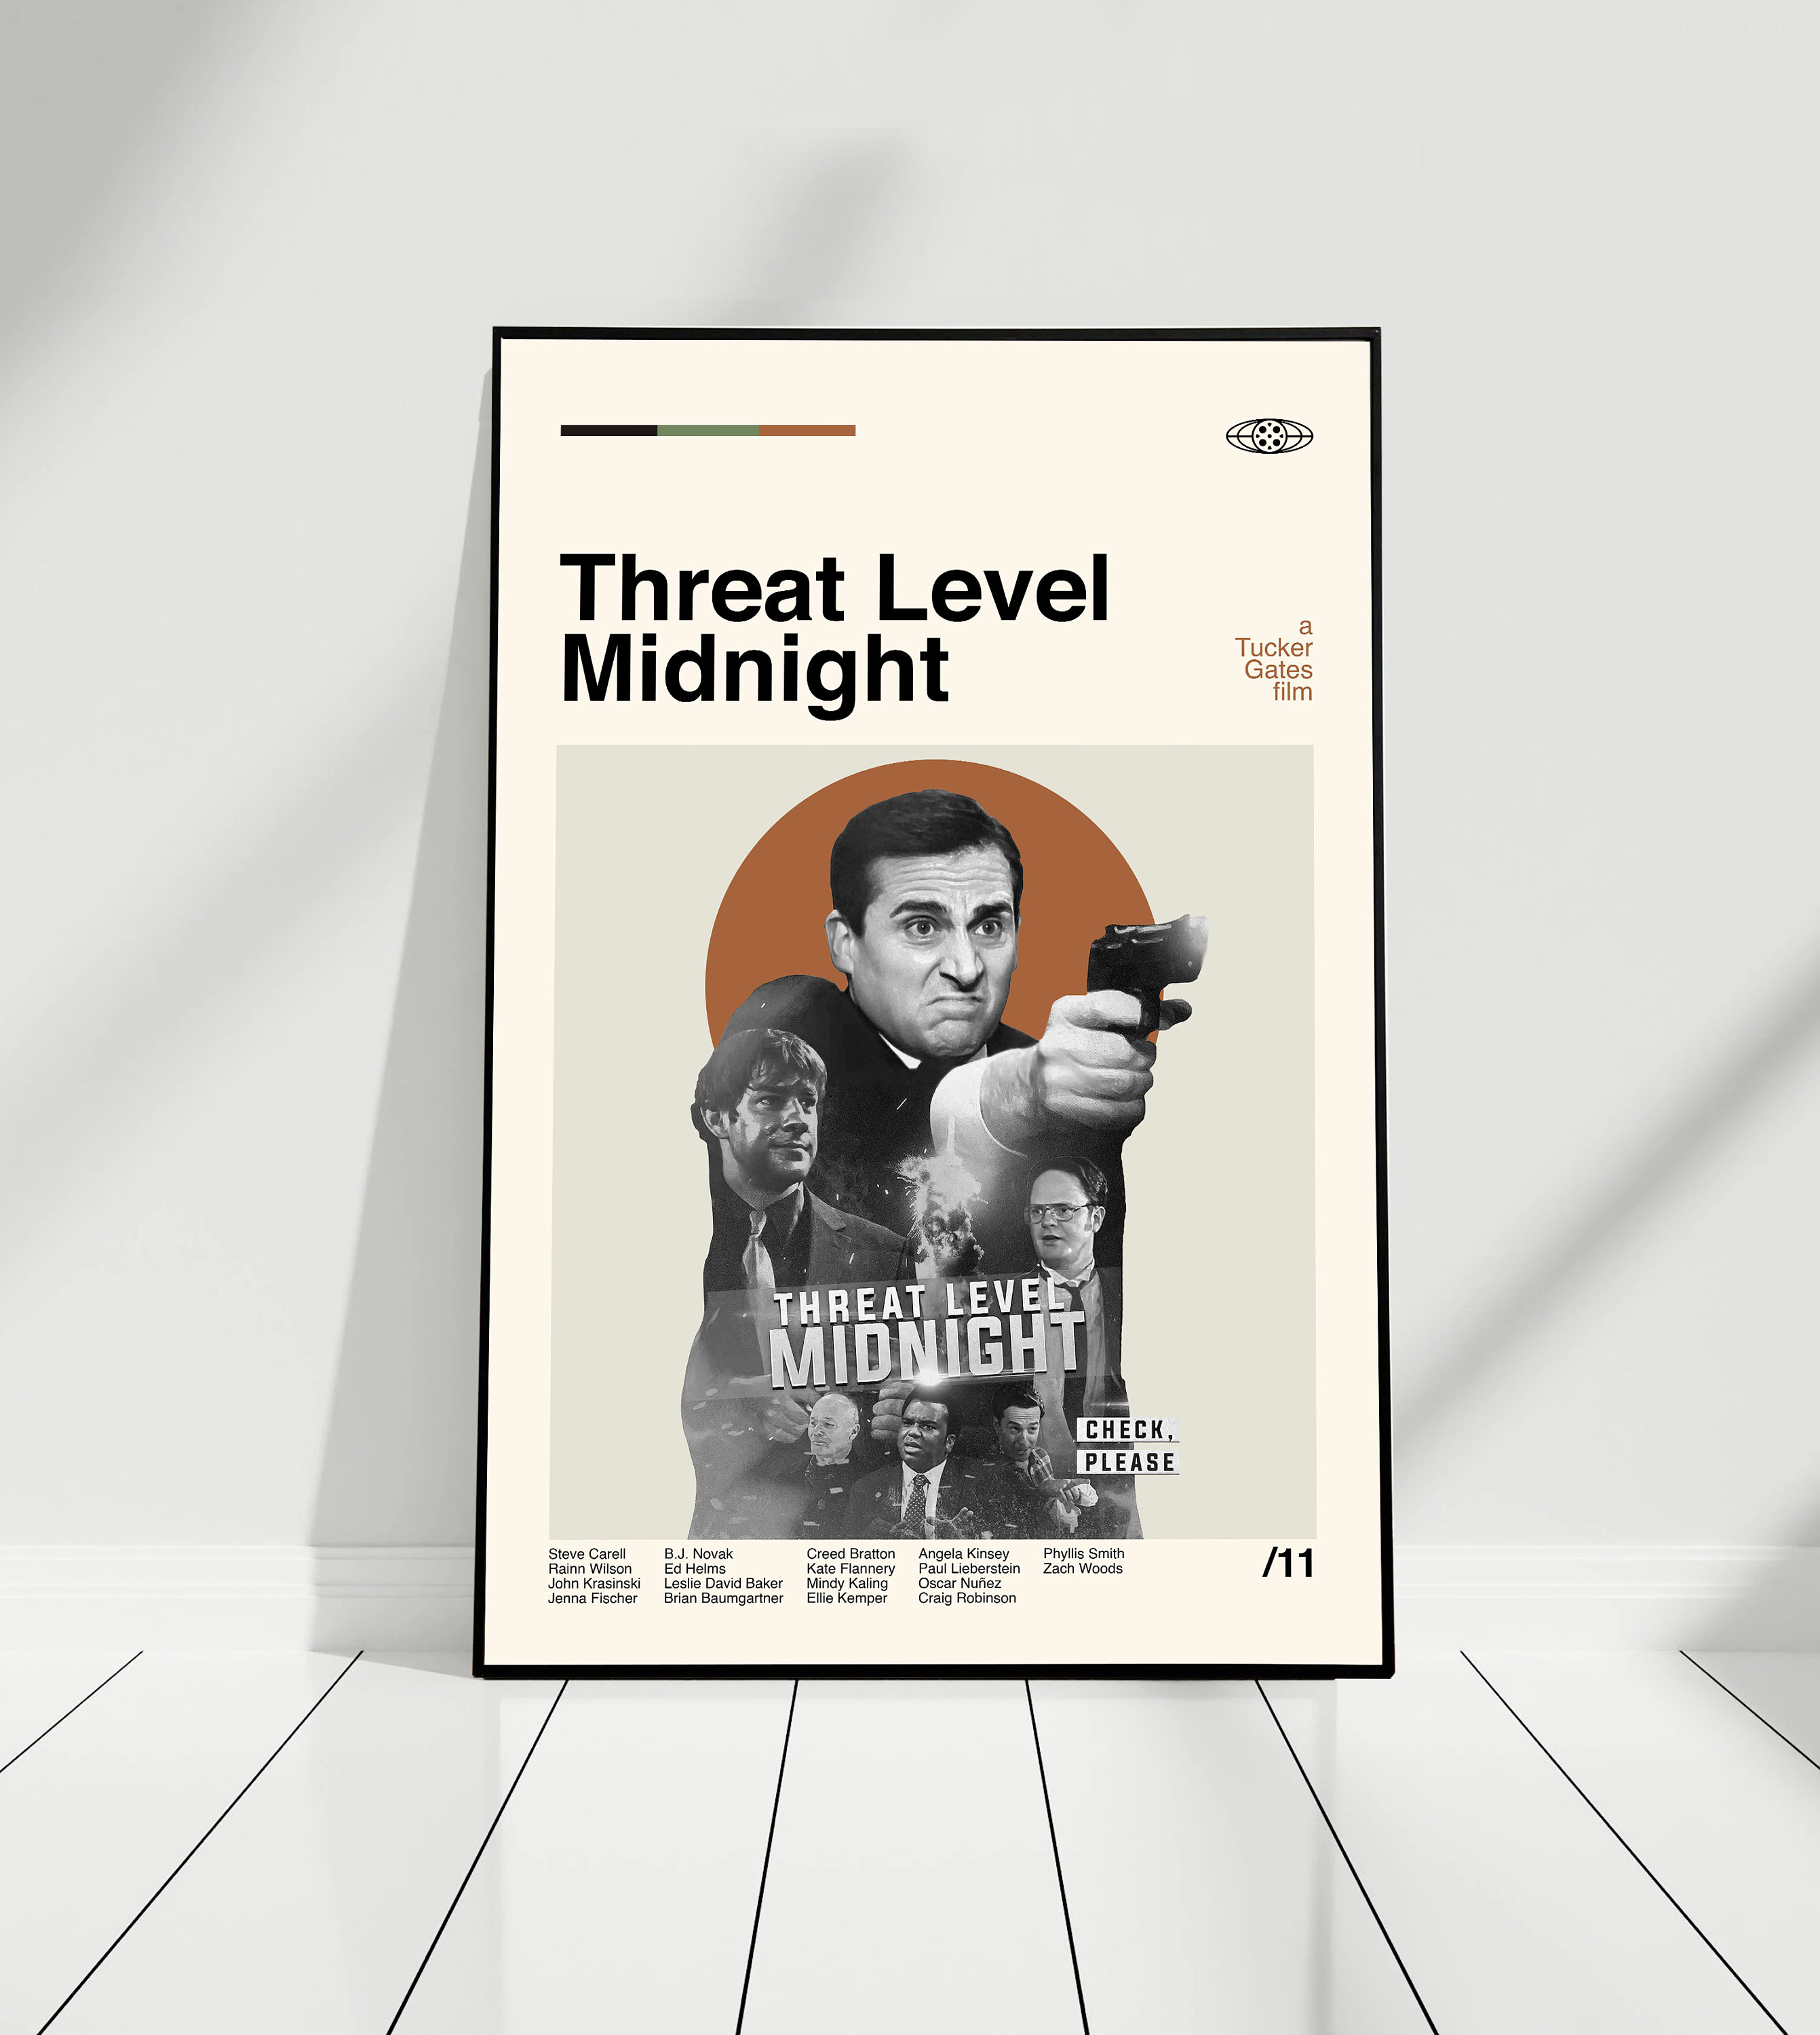 Discover THE OFFICE - Threat Level Midnight - TV Show Poster